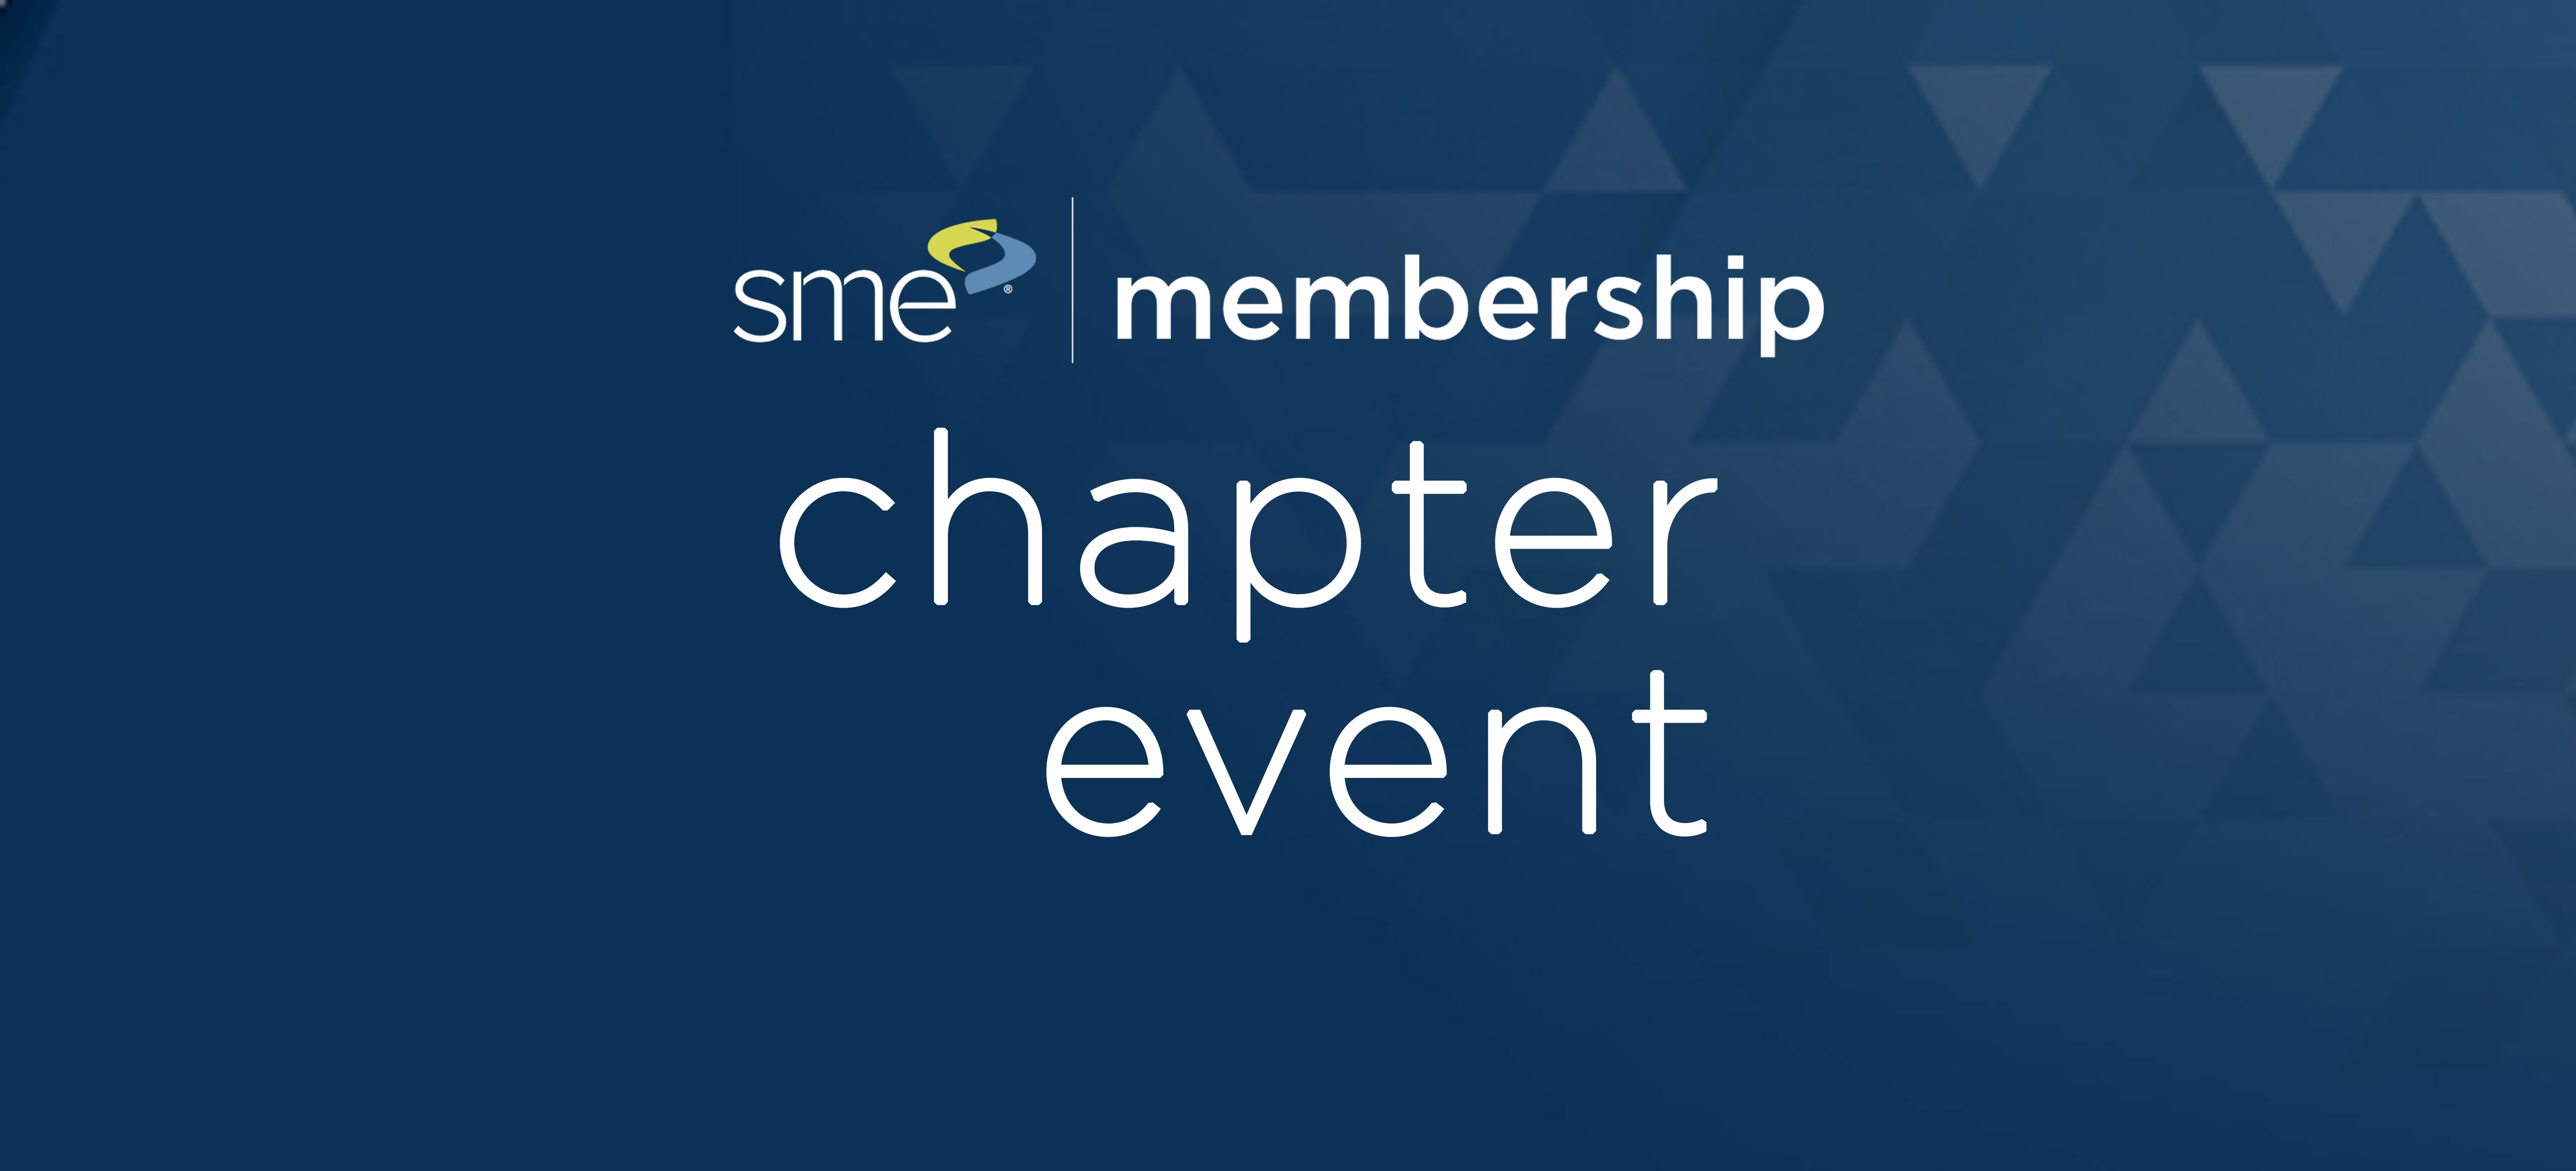 SME Chapter 354 November Plant Tour - Frontier Metal Stamping - CANCELLED 684